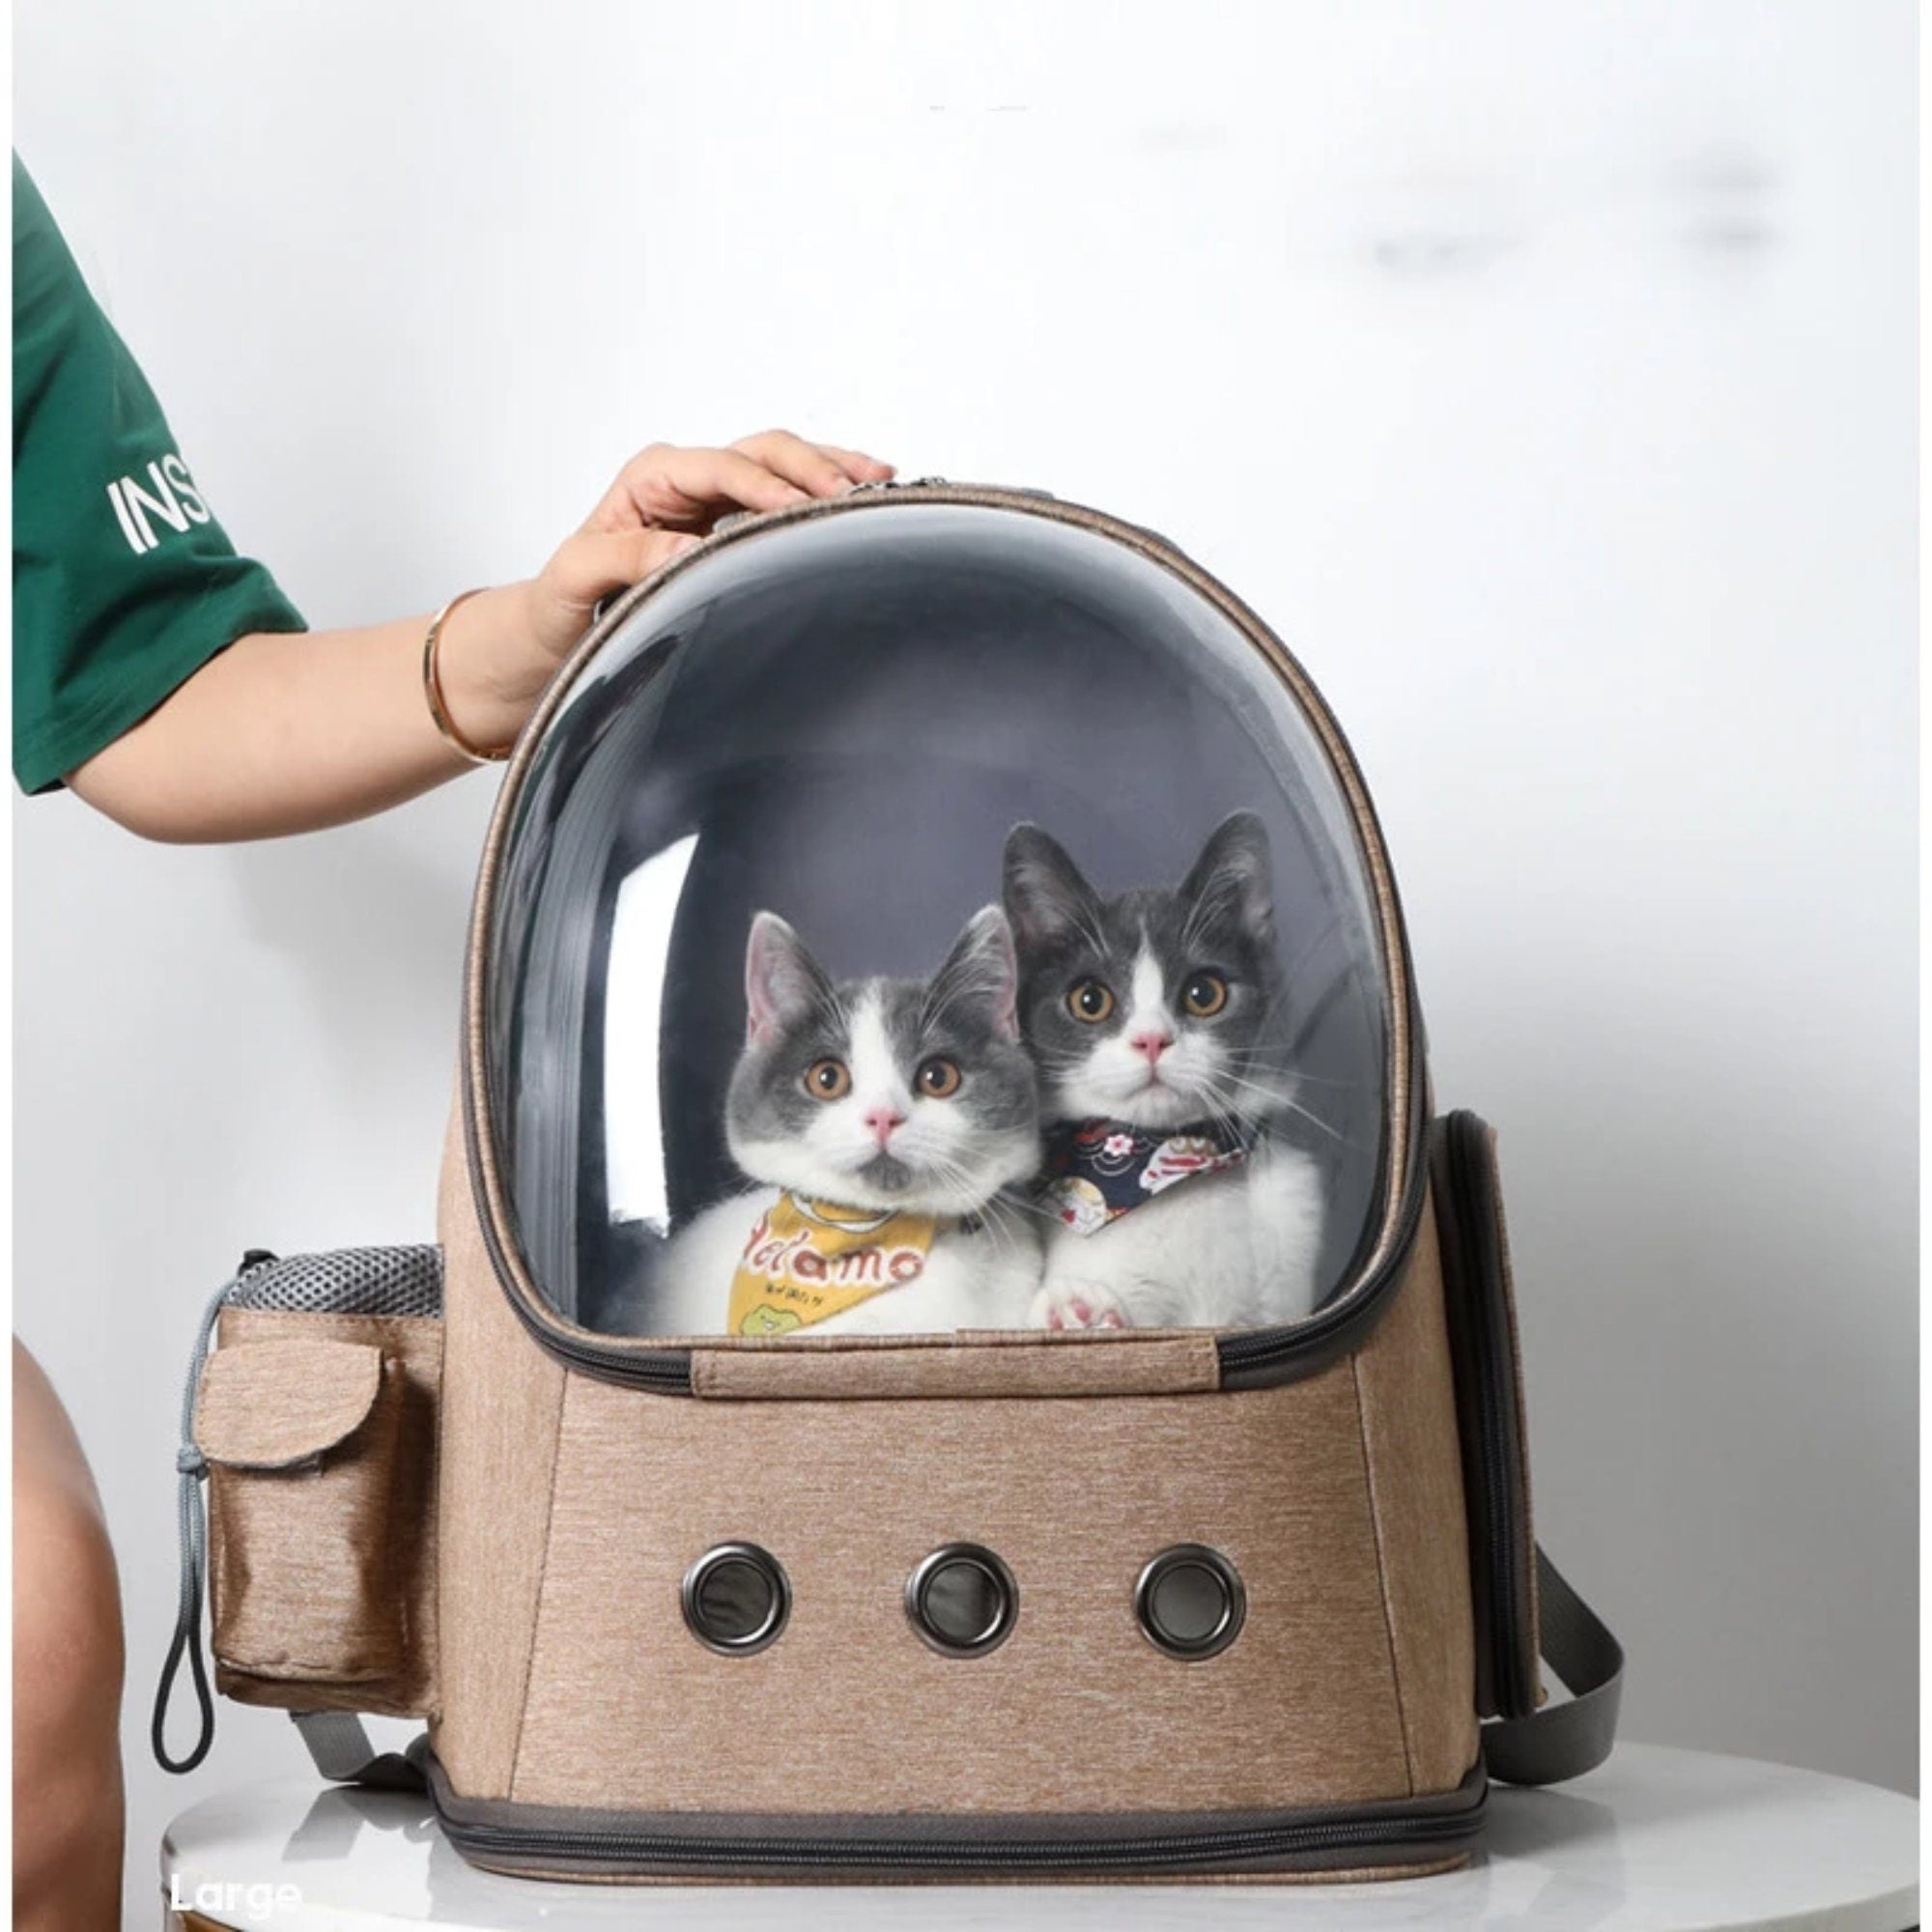 Paw Prize Space Capsule Cat Pet Backpack Carrier Dog Carrier